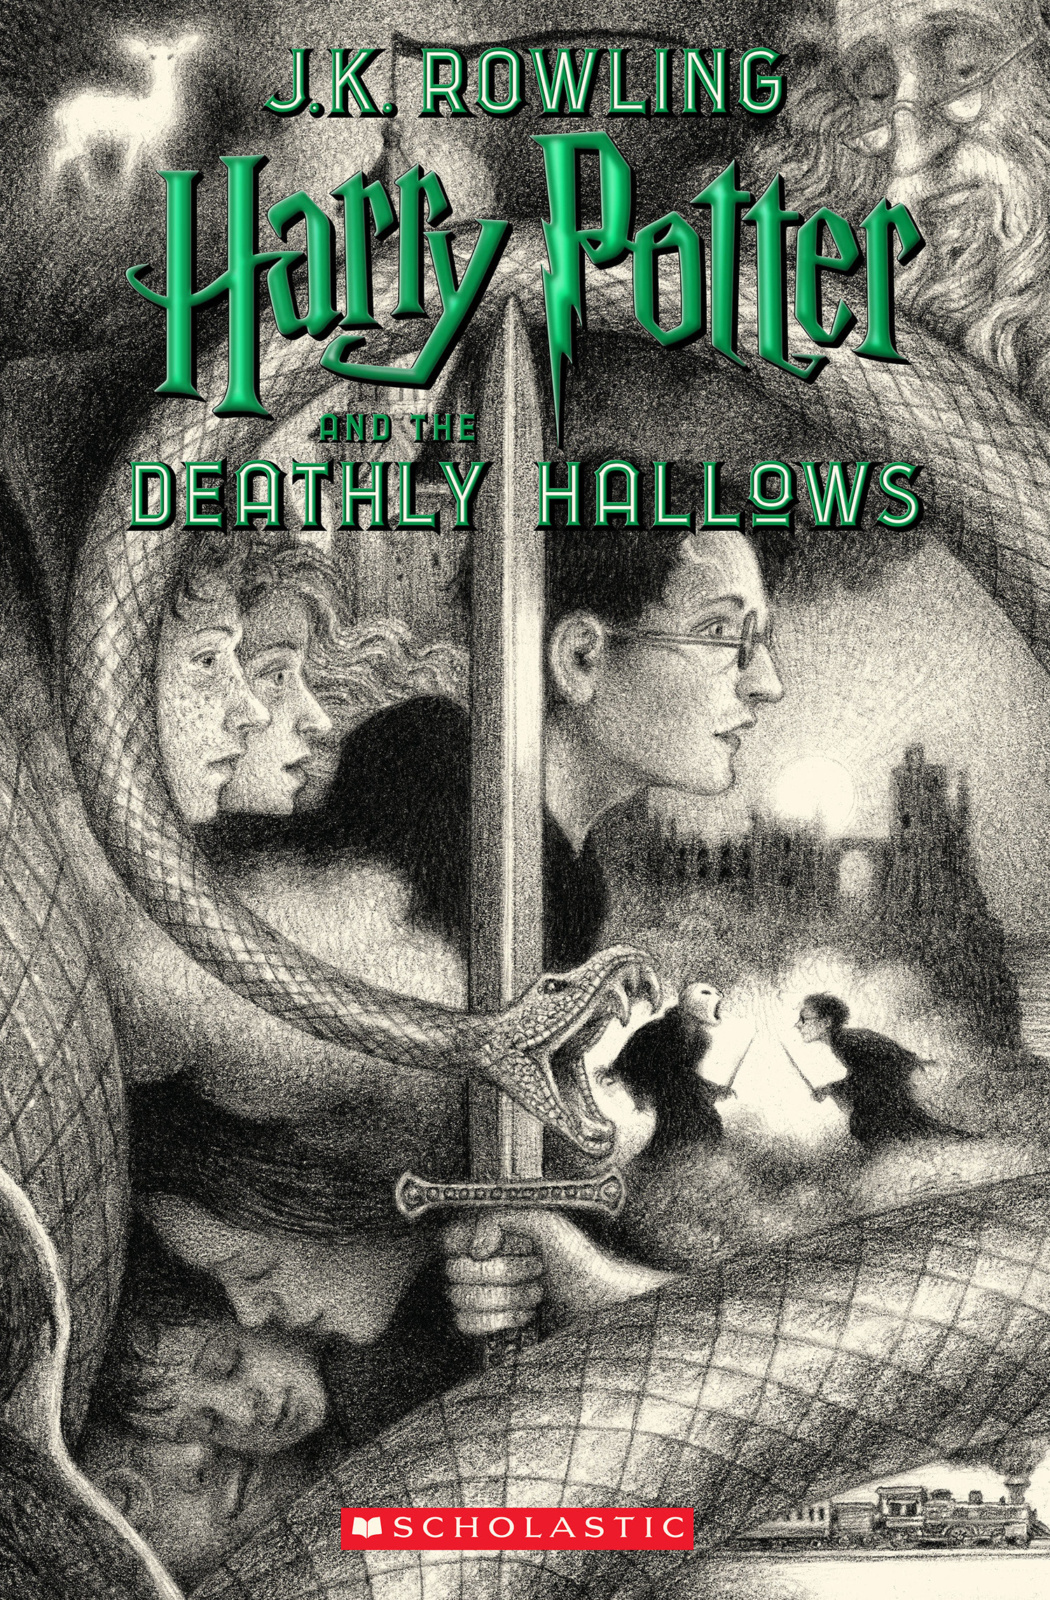 harry potter and the deathly hallows audiobook onlinr